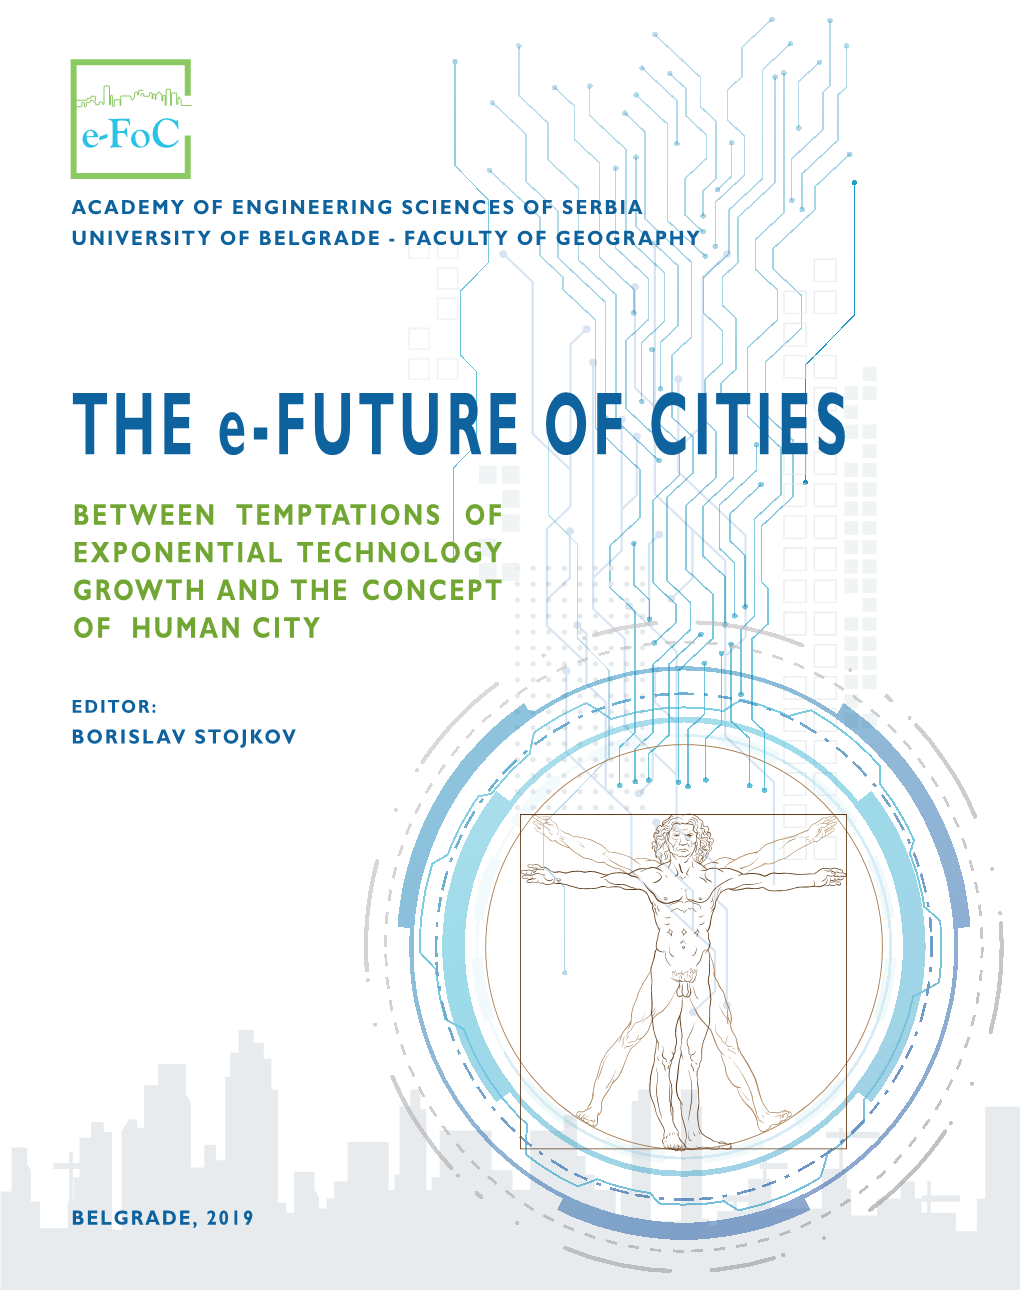 THE E-FUTURE of CITIES BETWEEN TEMPTATIONS of EXPONENTIAL TECHNOLOGY GROWTH and the CONCEPT of HUMAN CITY (THE BOOK of PROCEEDINGS)